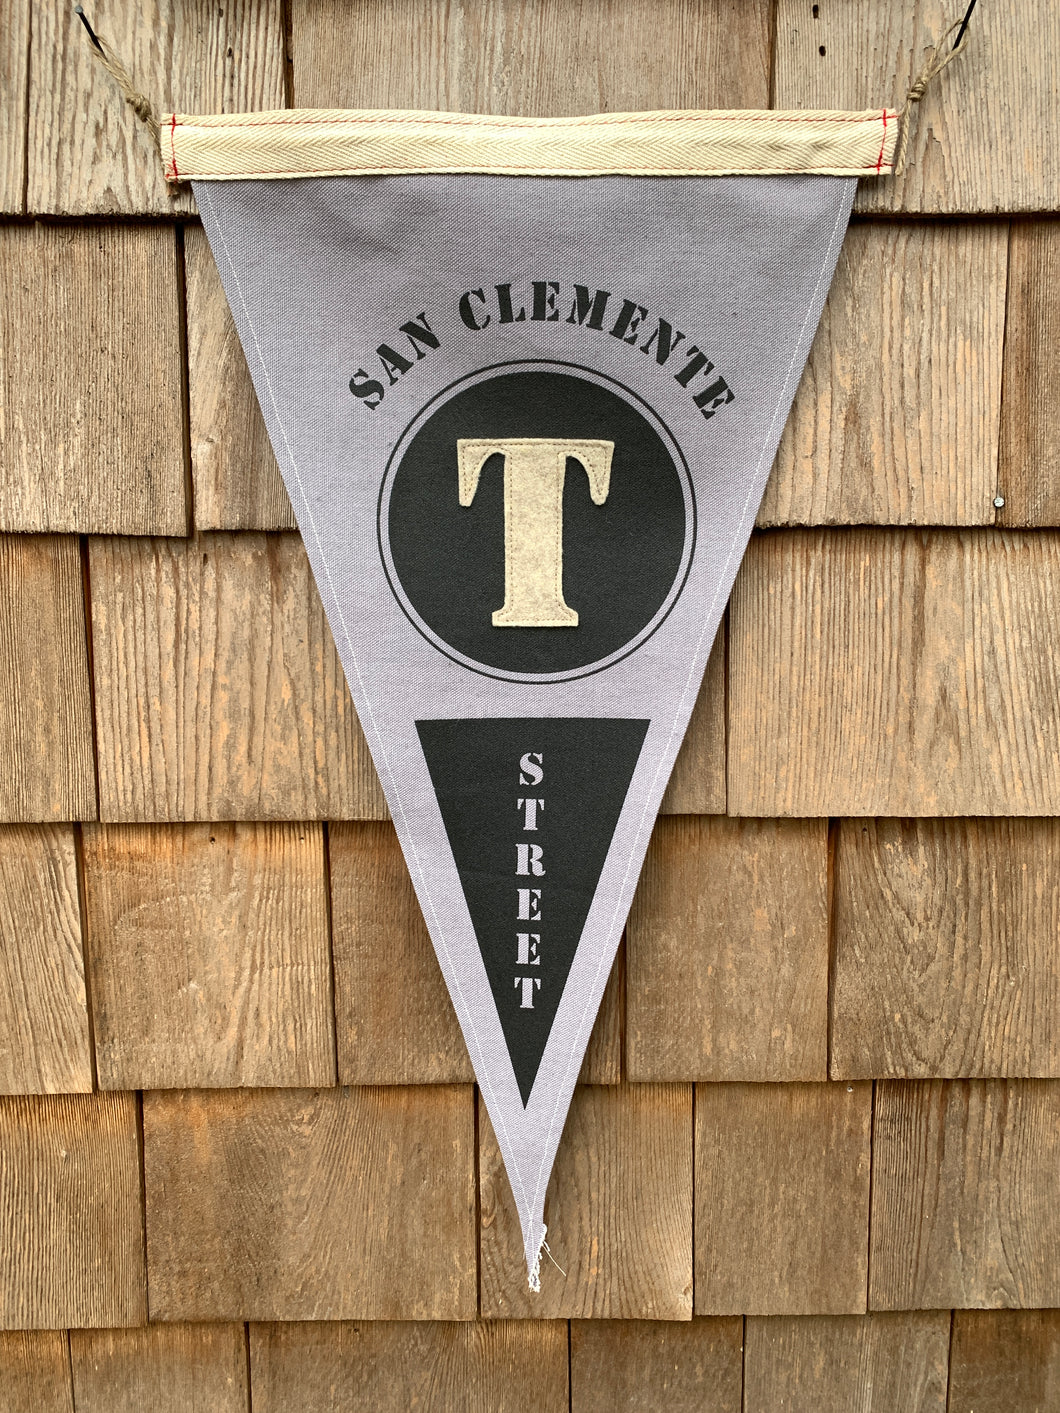 San Clemente - Vintage Styled Town Flag